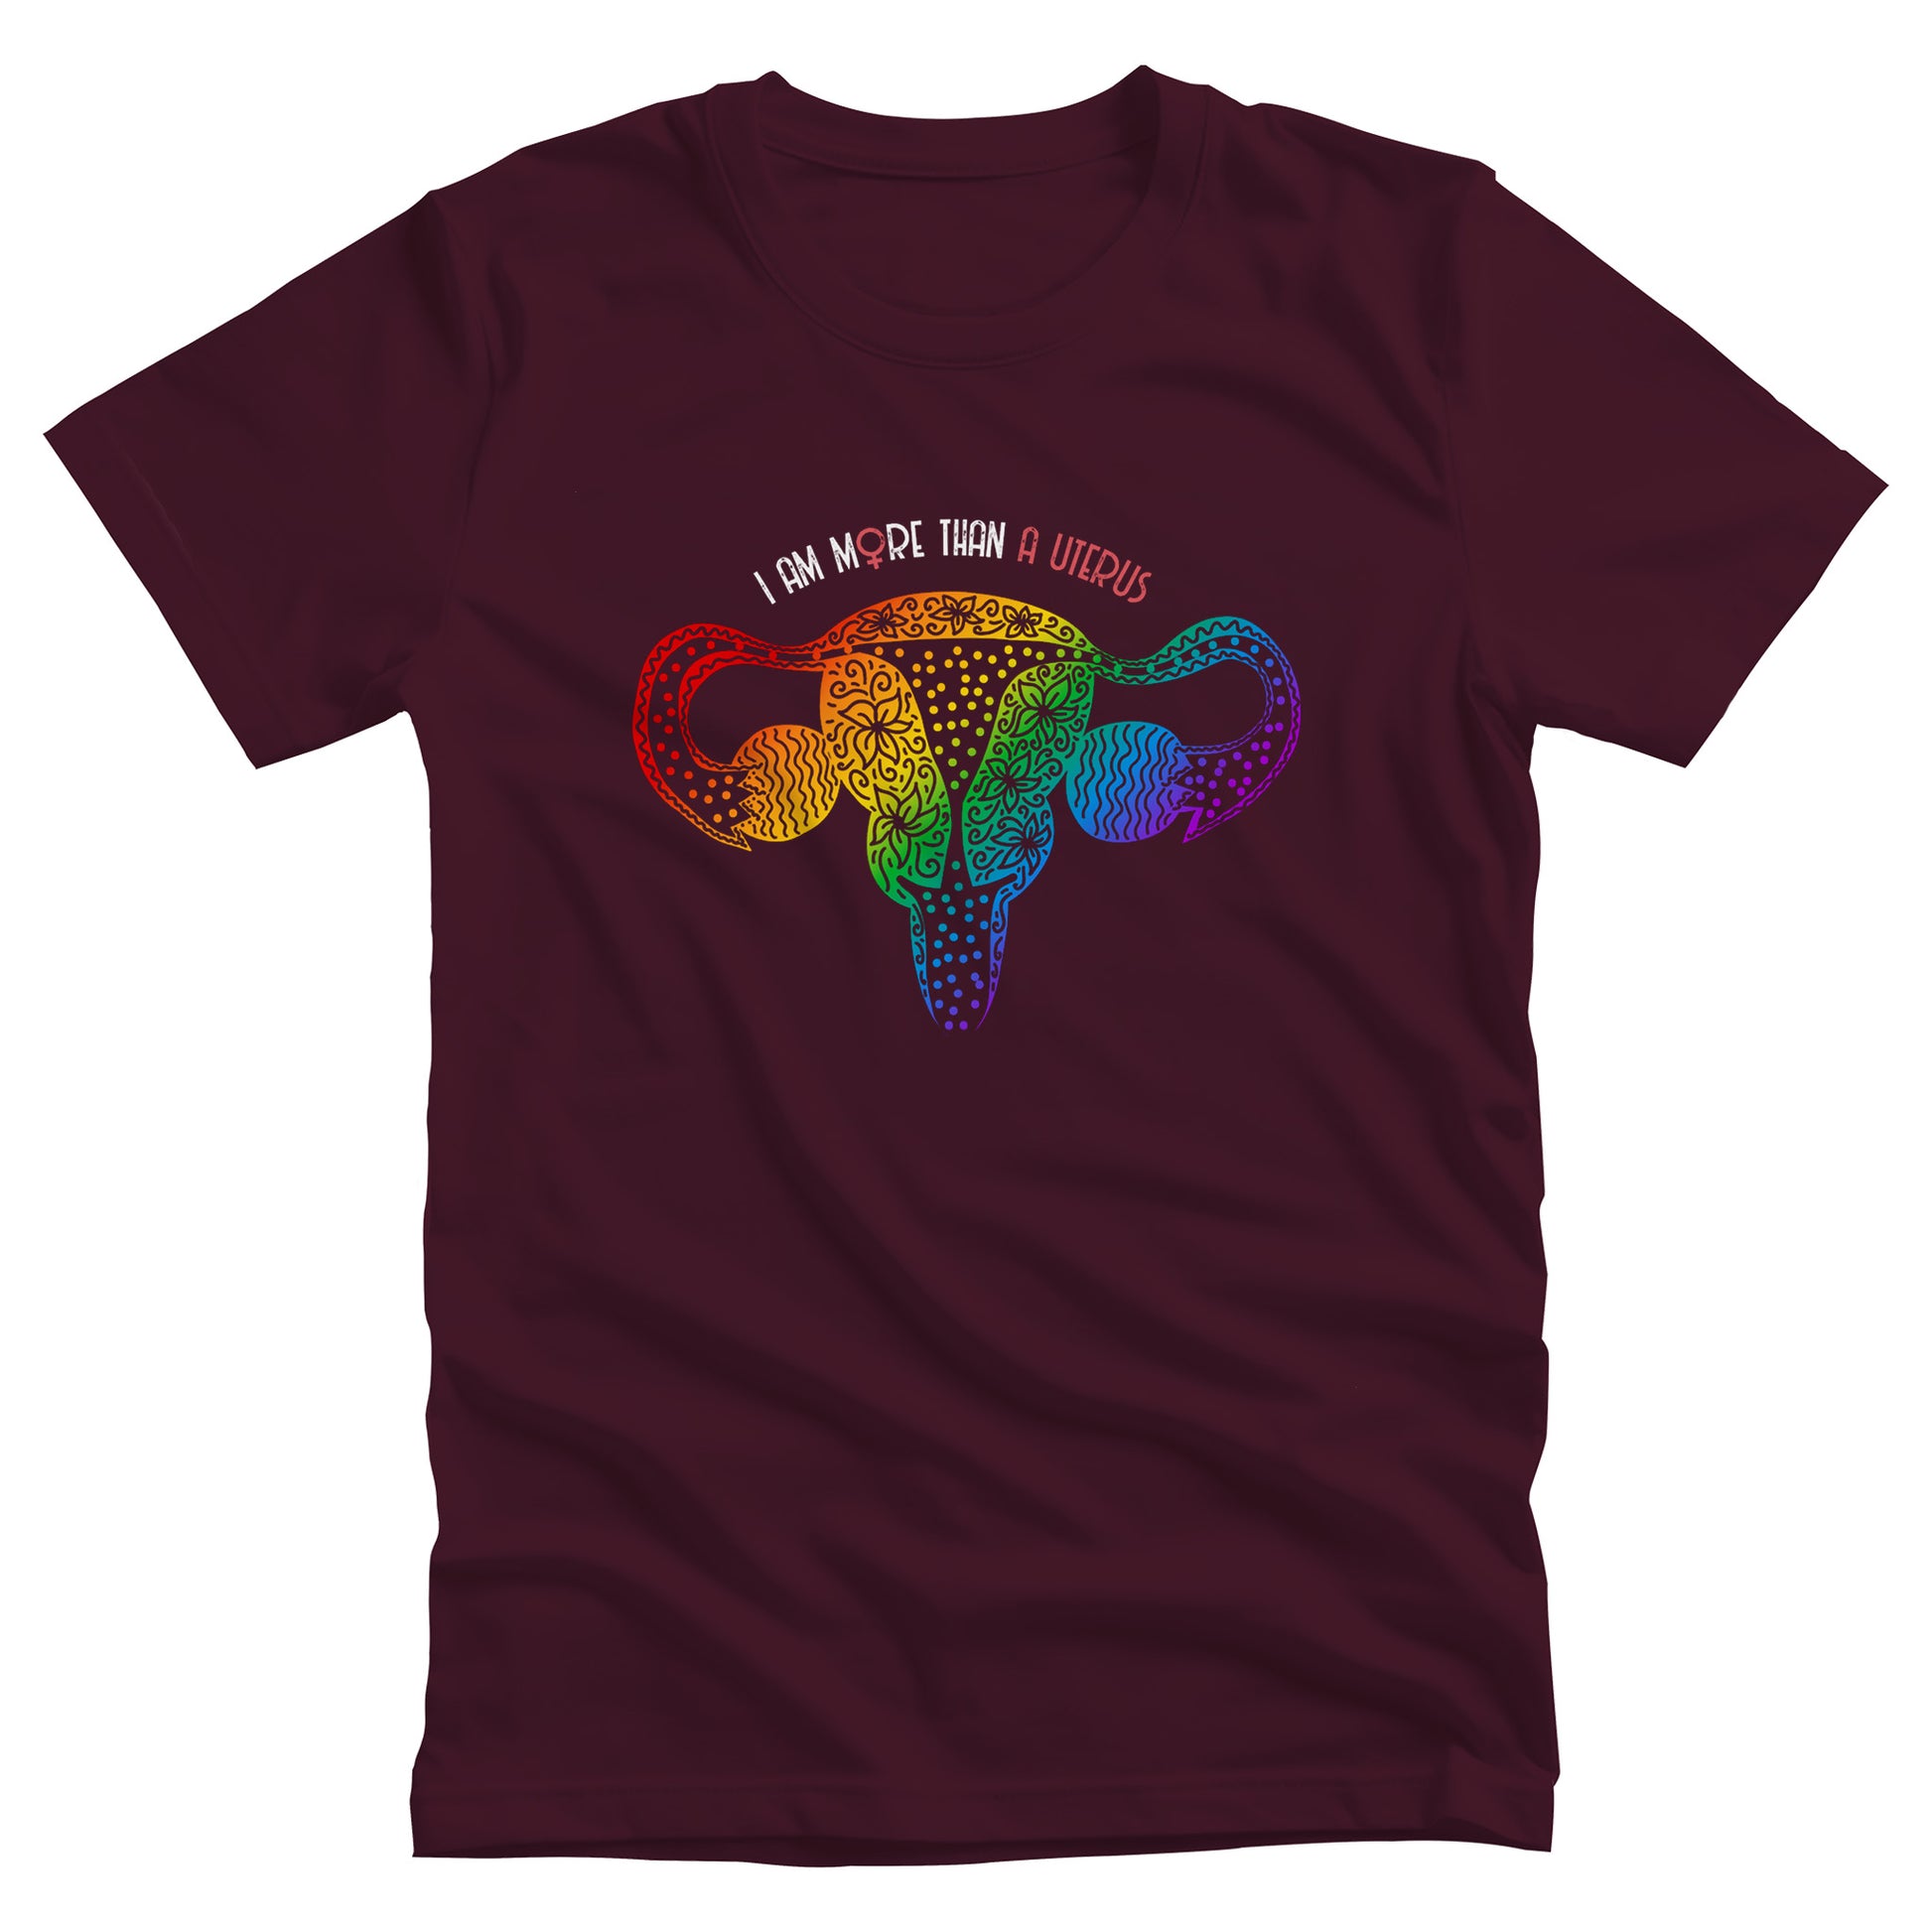 Maroon unisex t-shirt that says, “I am More Than a Uterus” in all caps. The “O” in “more” is the symbol for the female gender. The text is arched slightly over an illustration of a uterus made from swirls and flowers in a rainbow-gradient color.